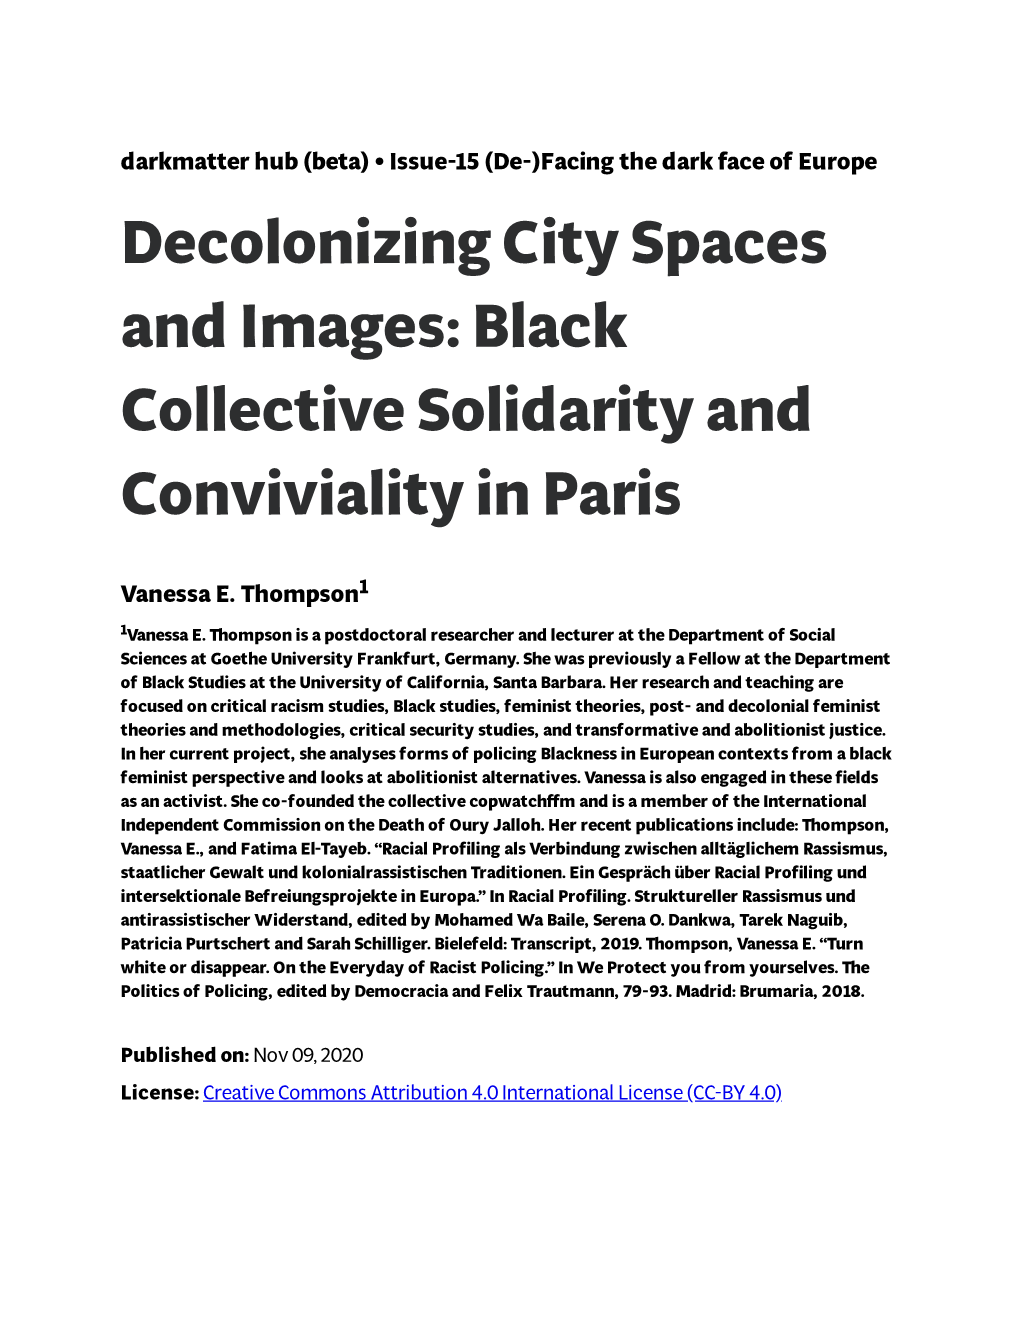 Black Collective Solidarity and Conviviality in Paris